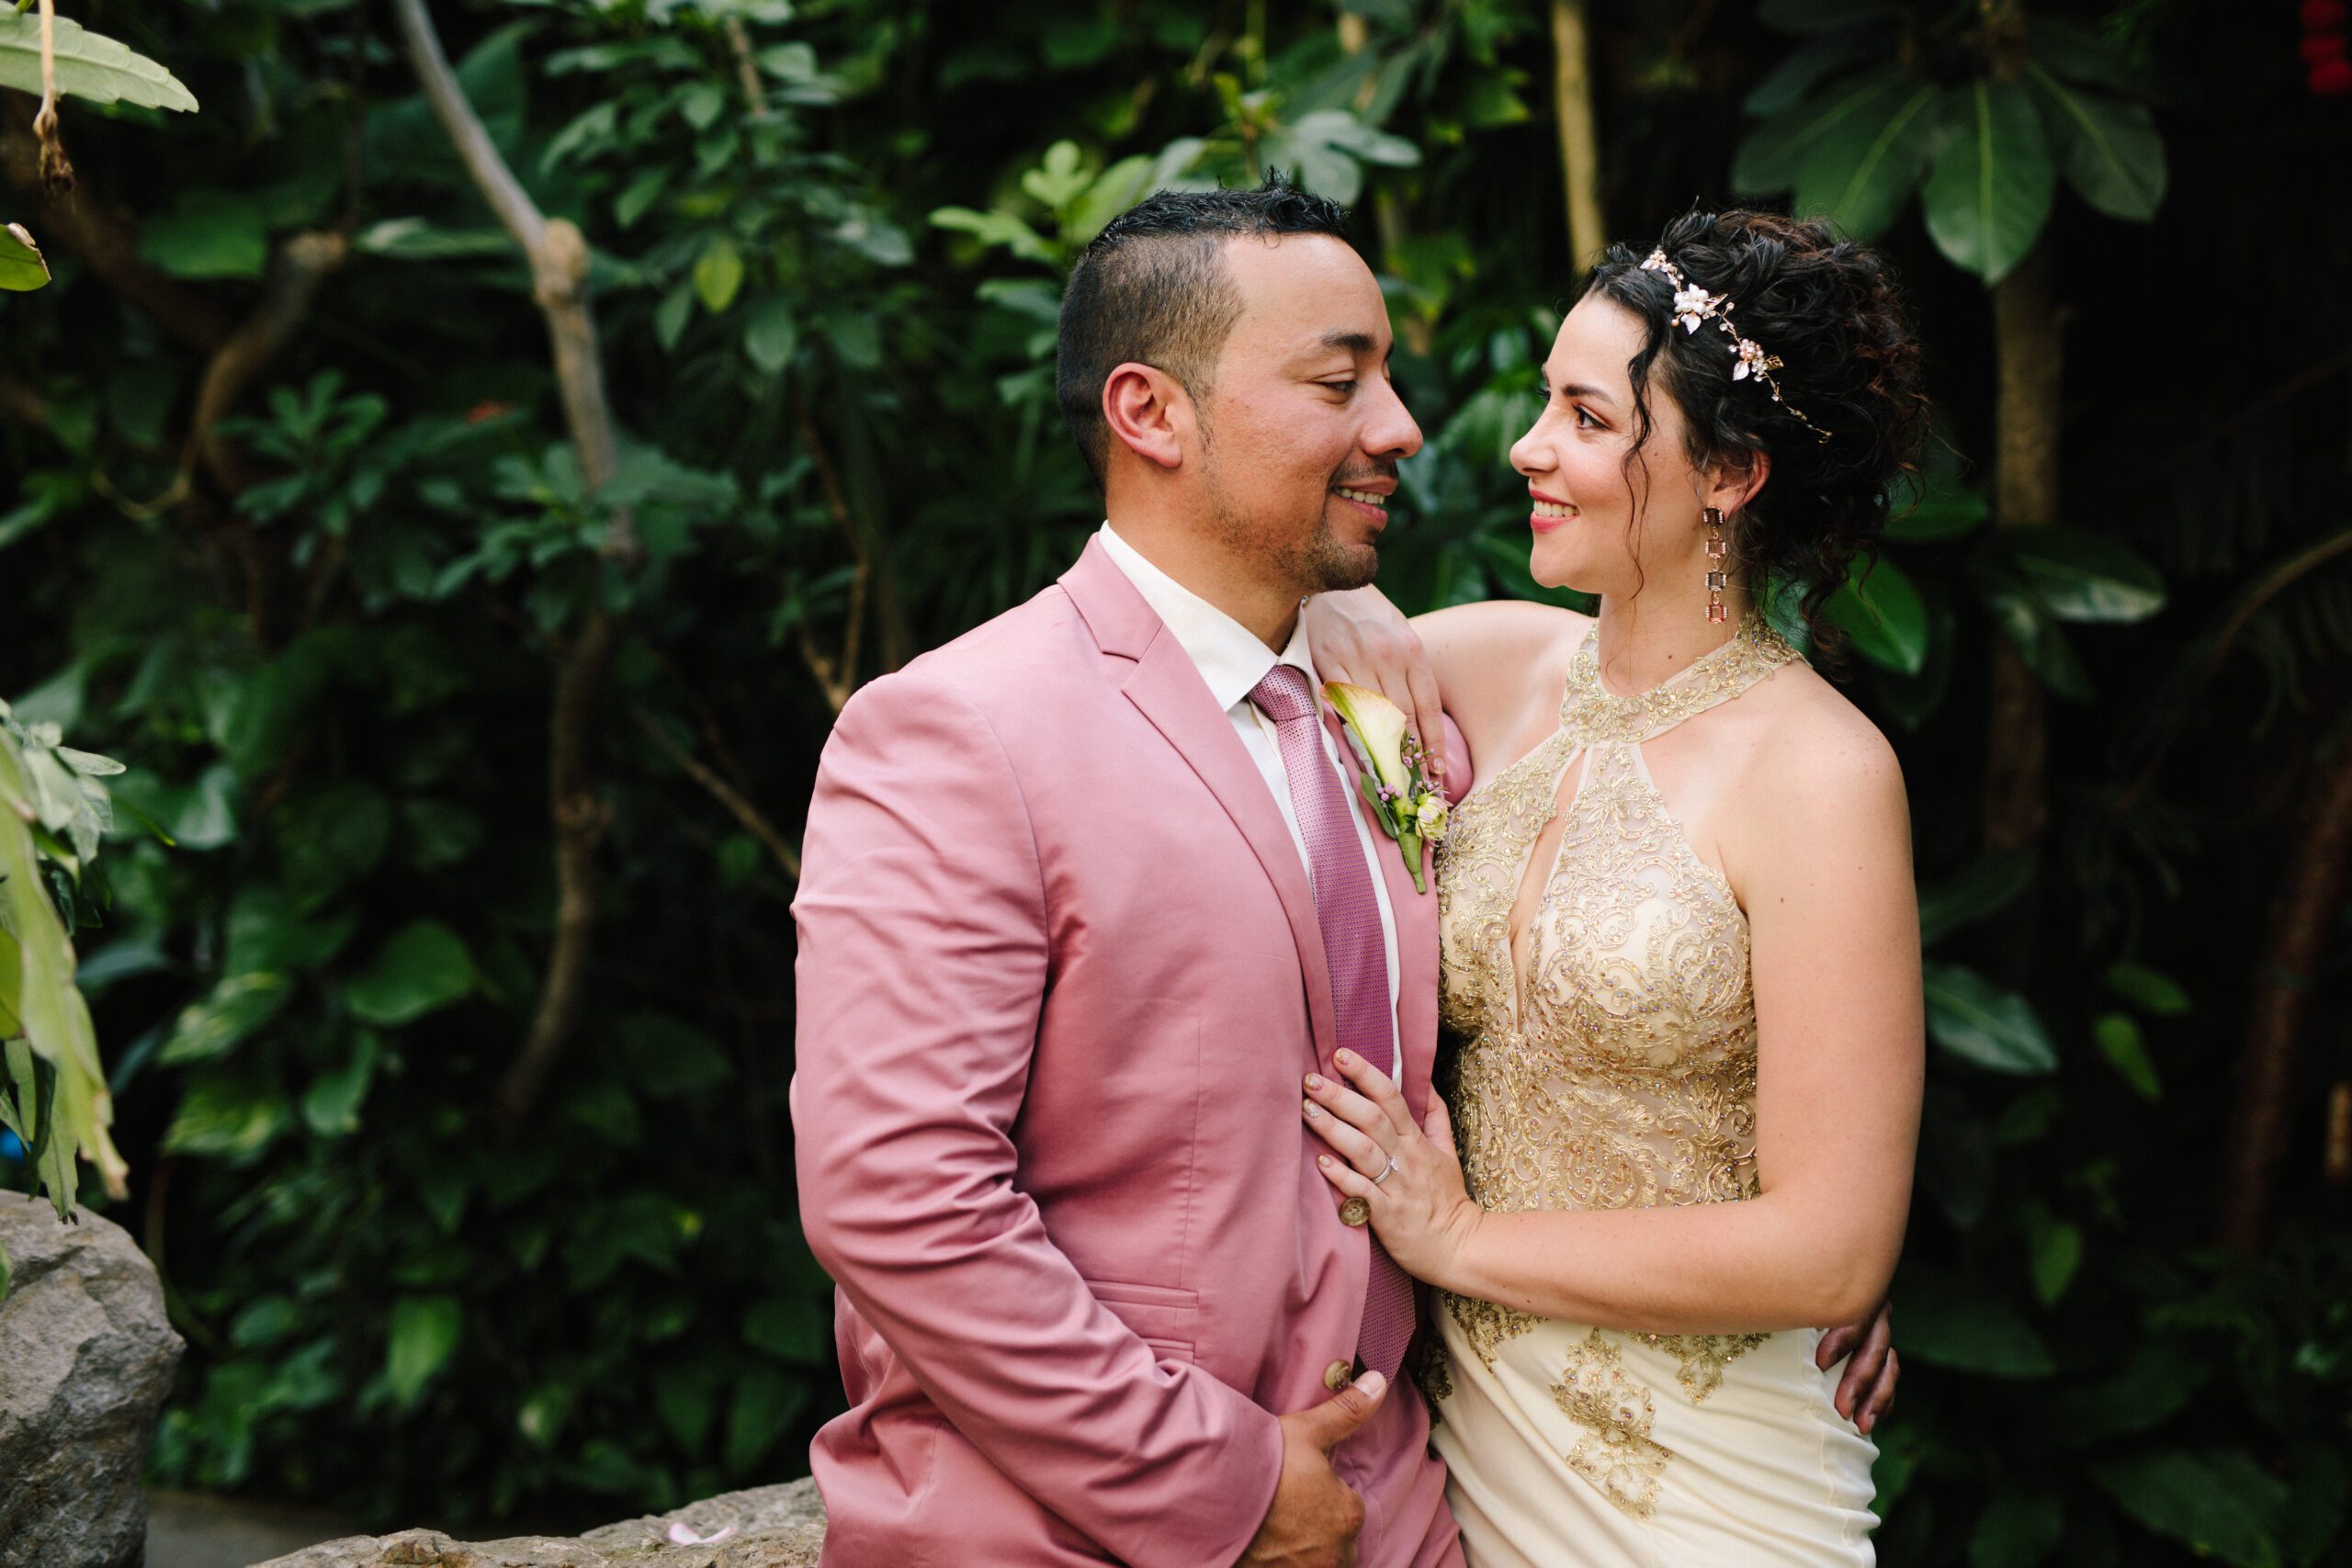 A sweet shot of the bride and groom looking at each other inside the Butterfly Pavilion oasis on their Wedding day. ⁠